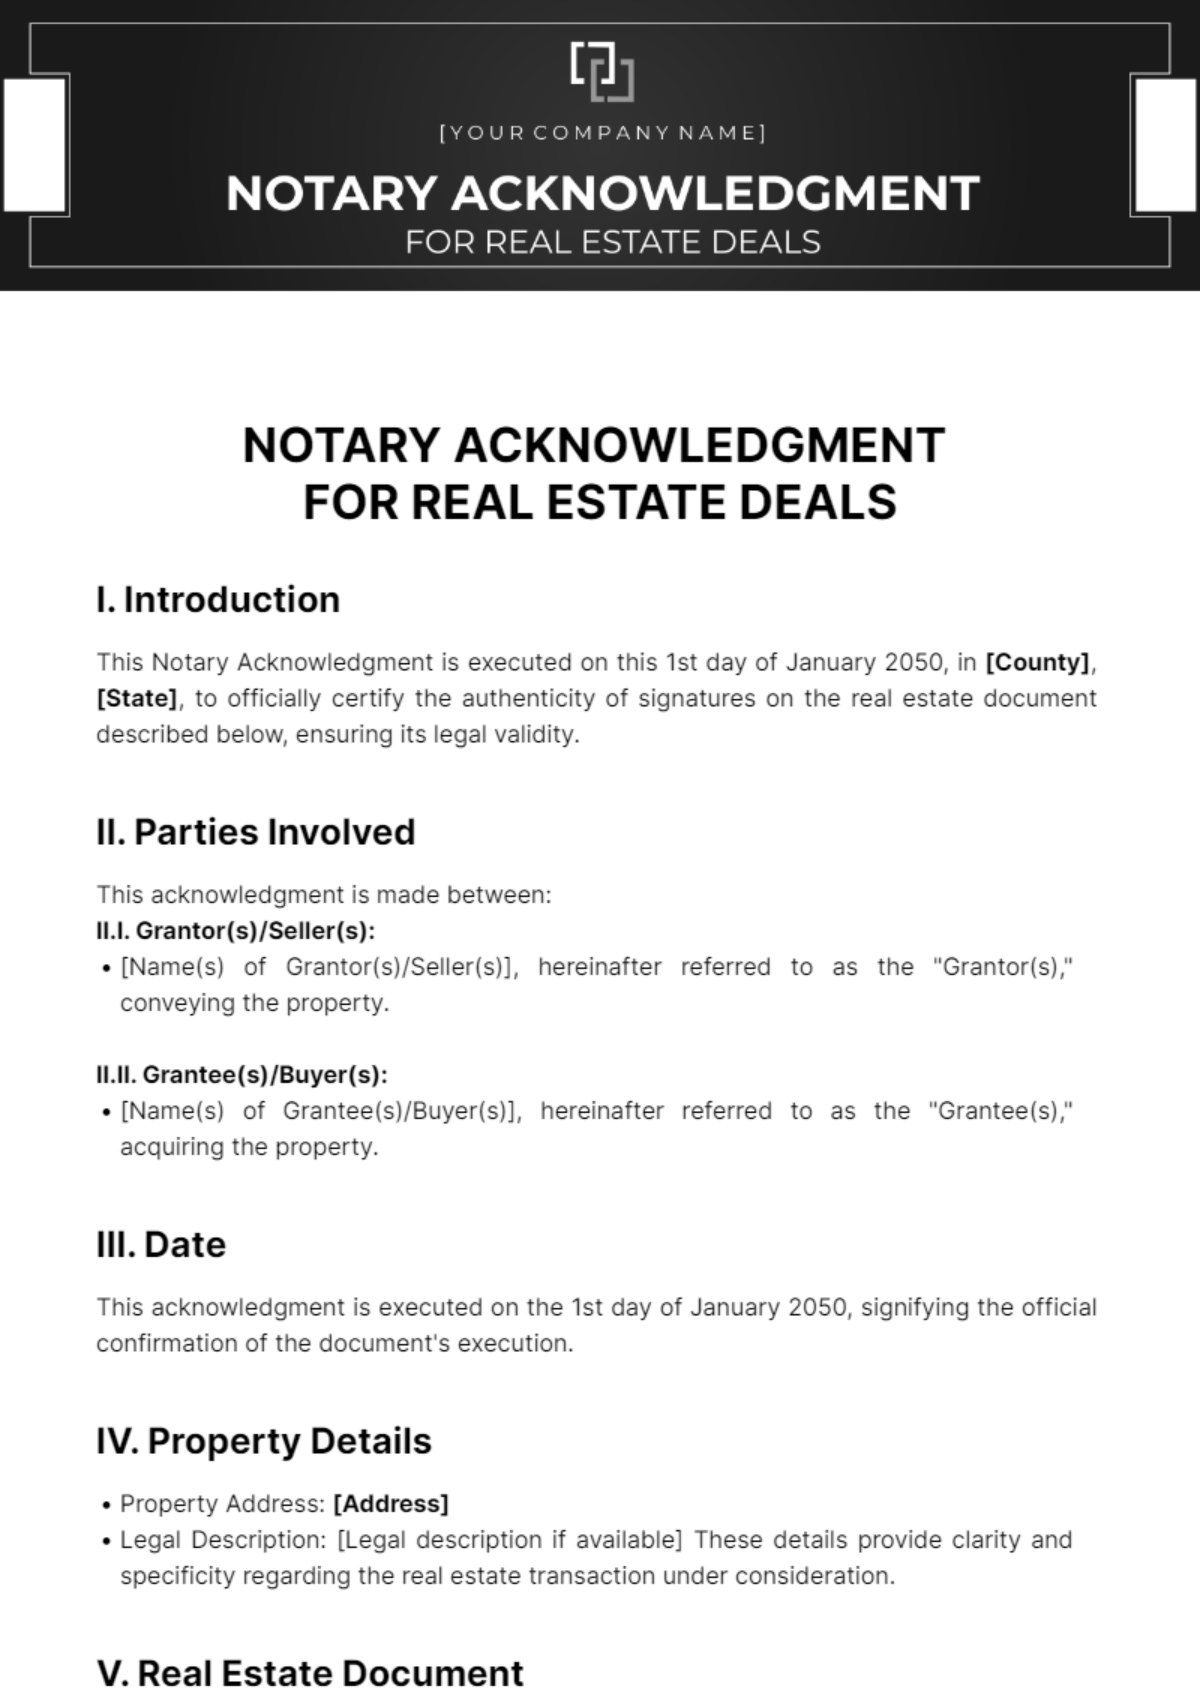 Notary Acknowledgment For Real Estate Deals Template